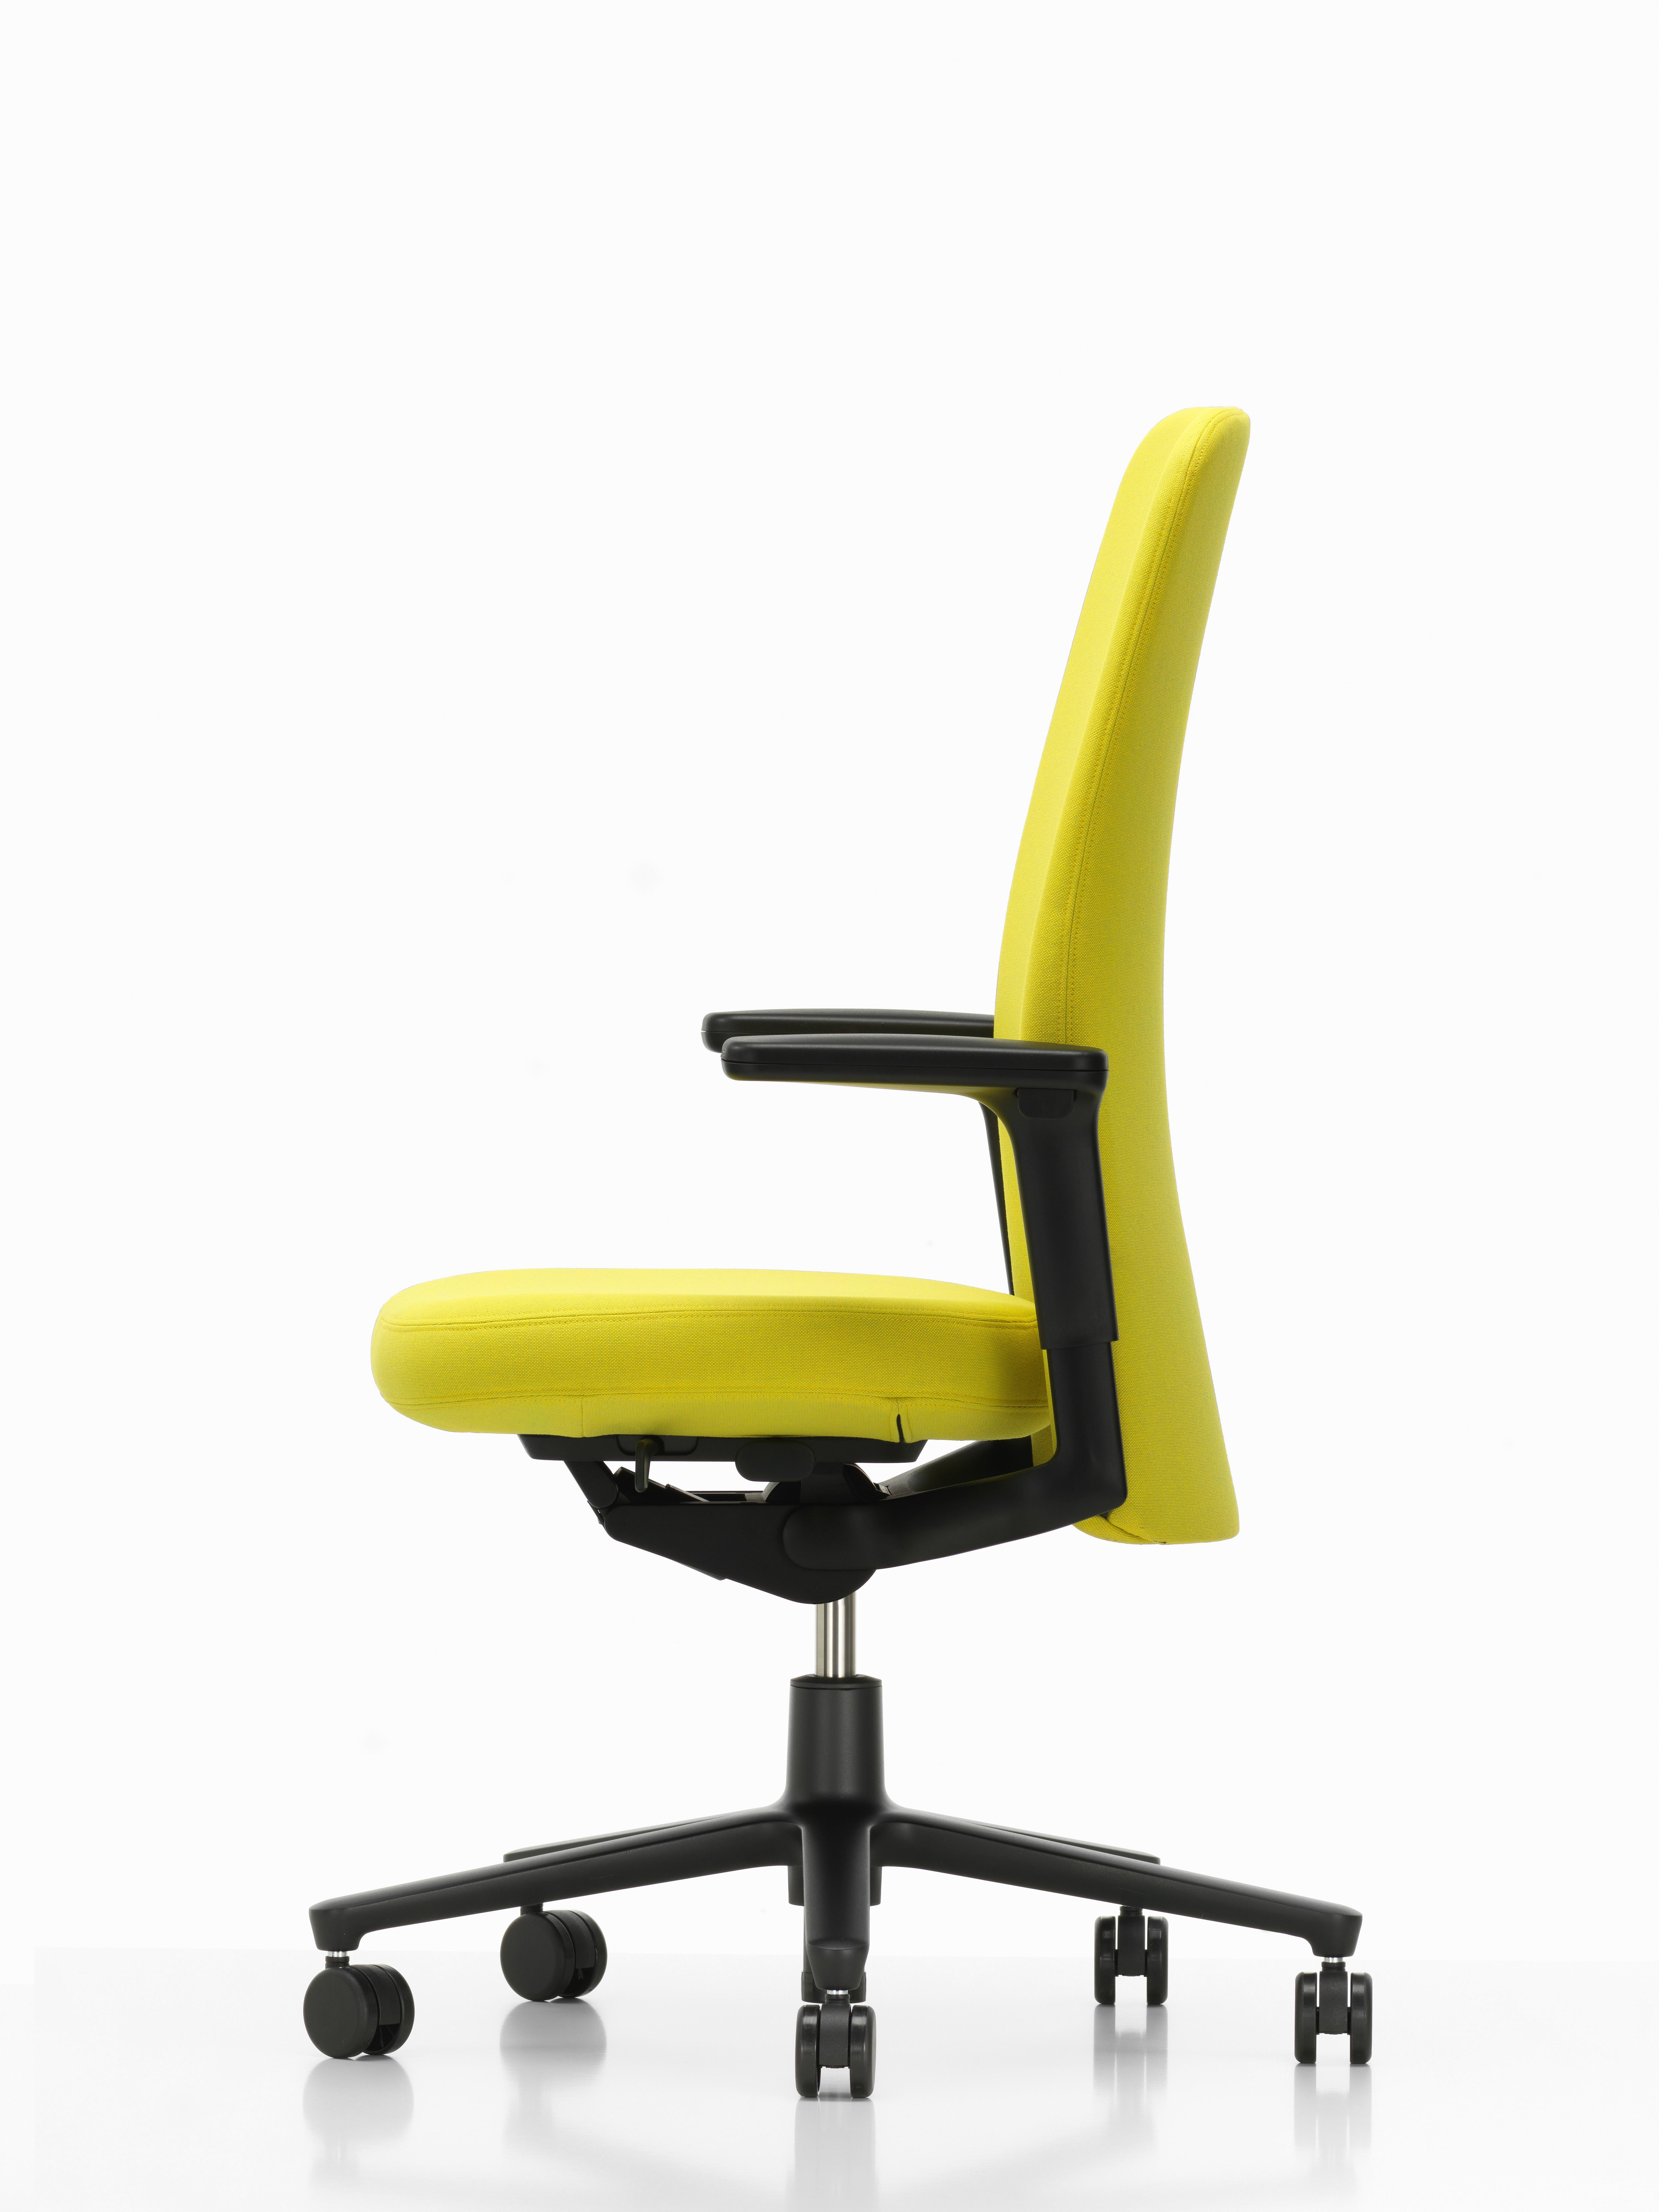 The medium-height backrest provides comfortable lumbar support, even over prolonged periods of sitting and also emanates linear simplicity. The back extends so far down that no mechanical components are visible from behind. This makes for a serene